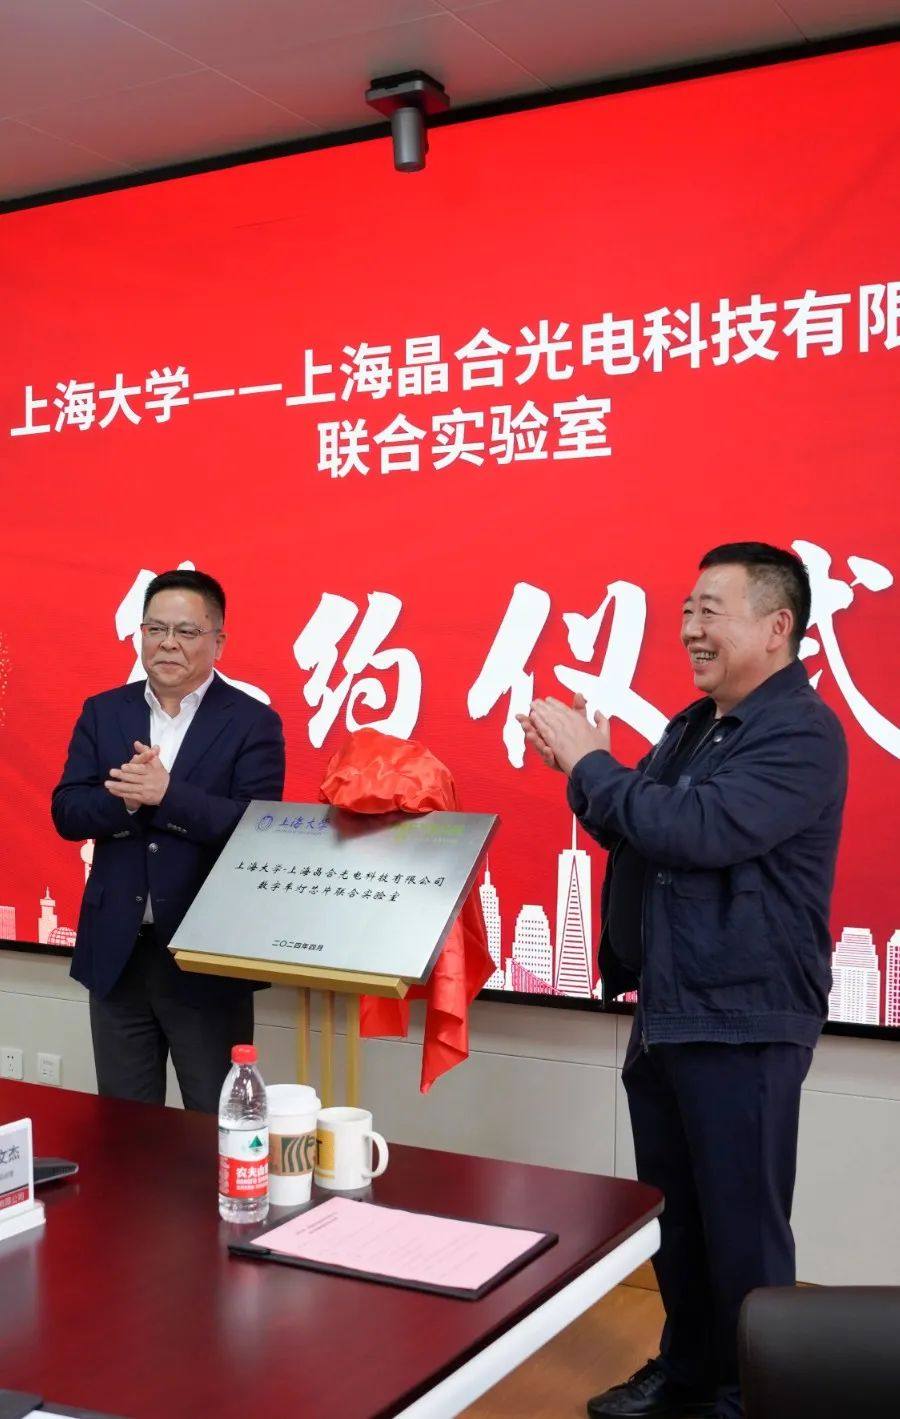 Micro-led lights up the future: Shanghai University and Shanghai Jinghe Optoelectronics signed a strategic cooperation agreement to build a joint laboratory for automotive digital lighting chips